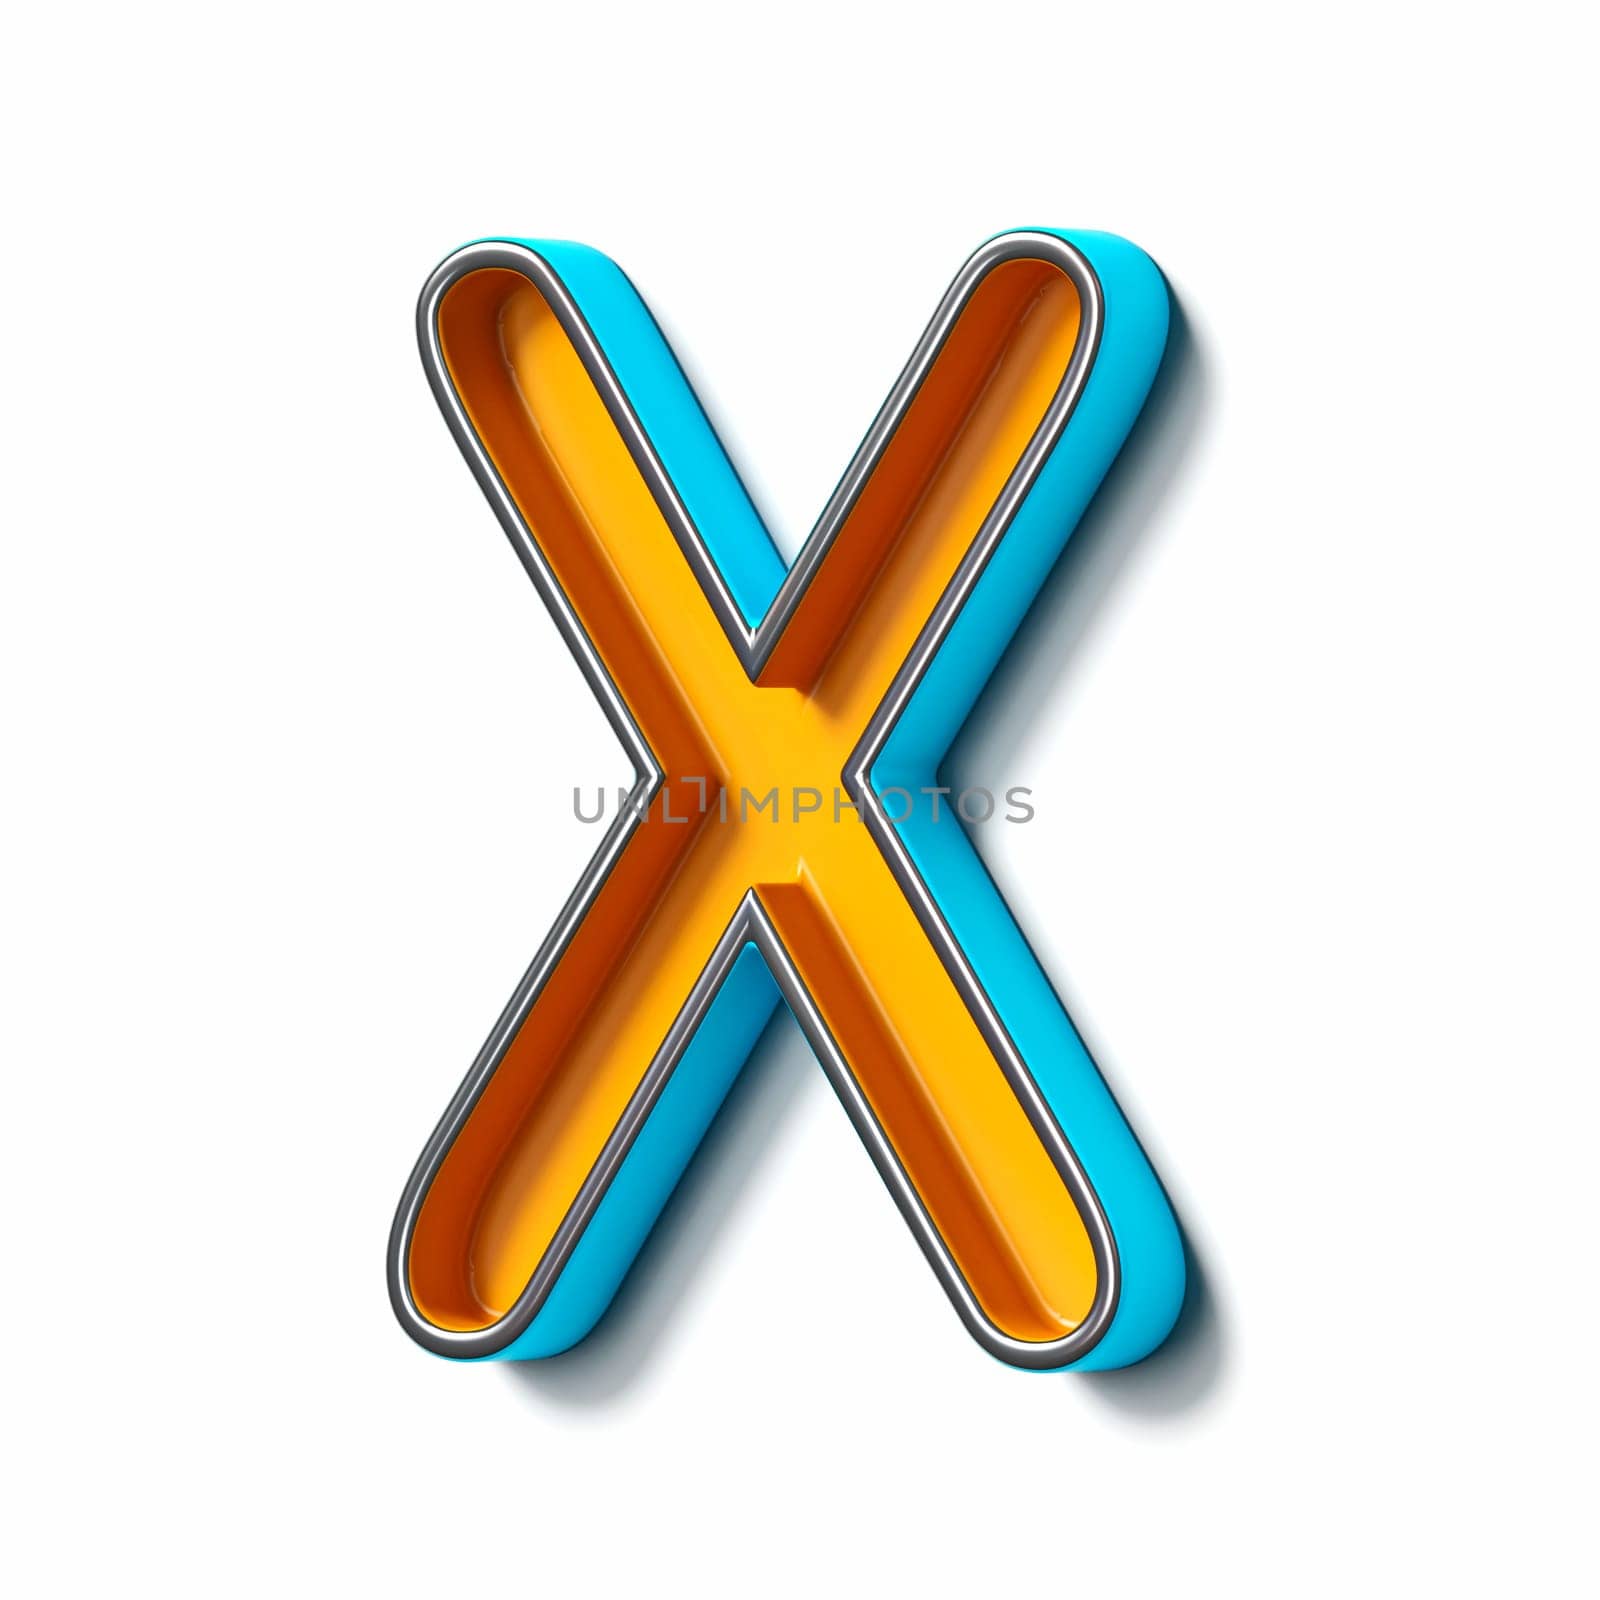 Orange blue thin metal font Letter X 3D rendering illustration isolated on white background